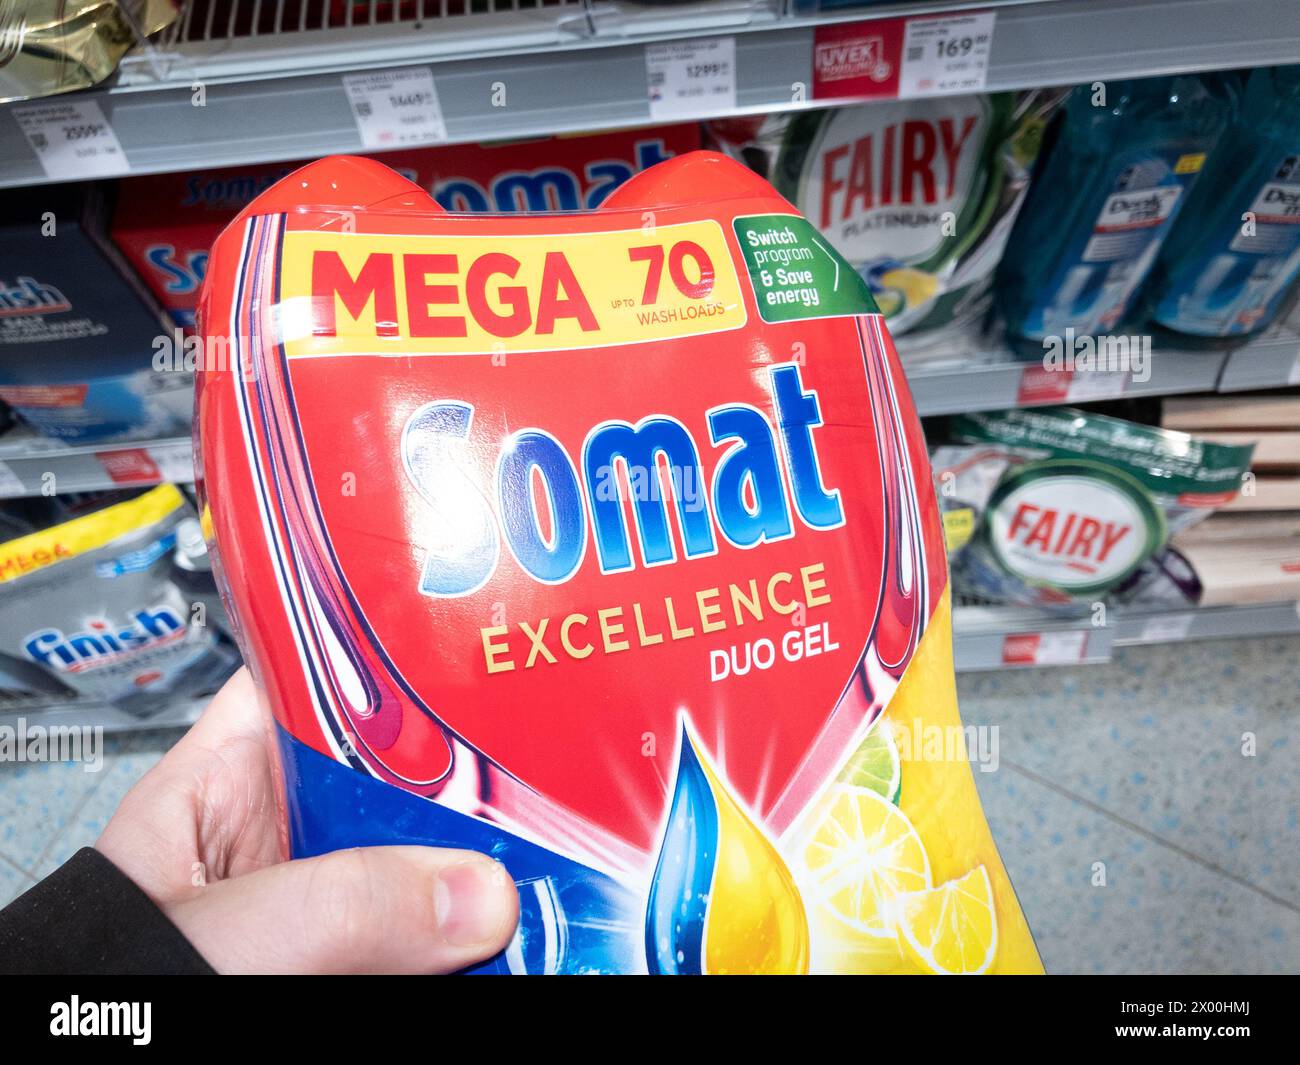 Picture of a box with the logo of Somat for sale in a belgrade supermarket. Somat is a brand specializing in automatic dishwashing products, deliverin Stock Photo